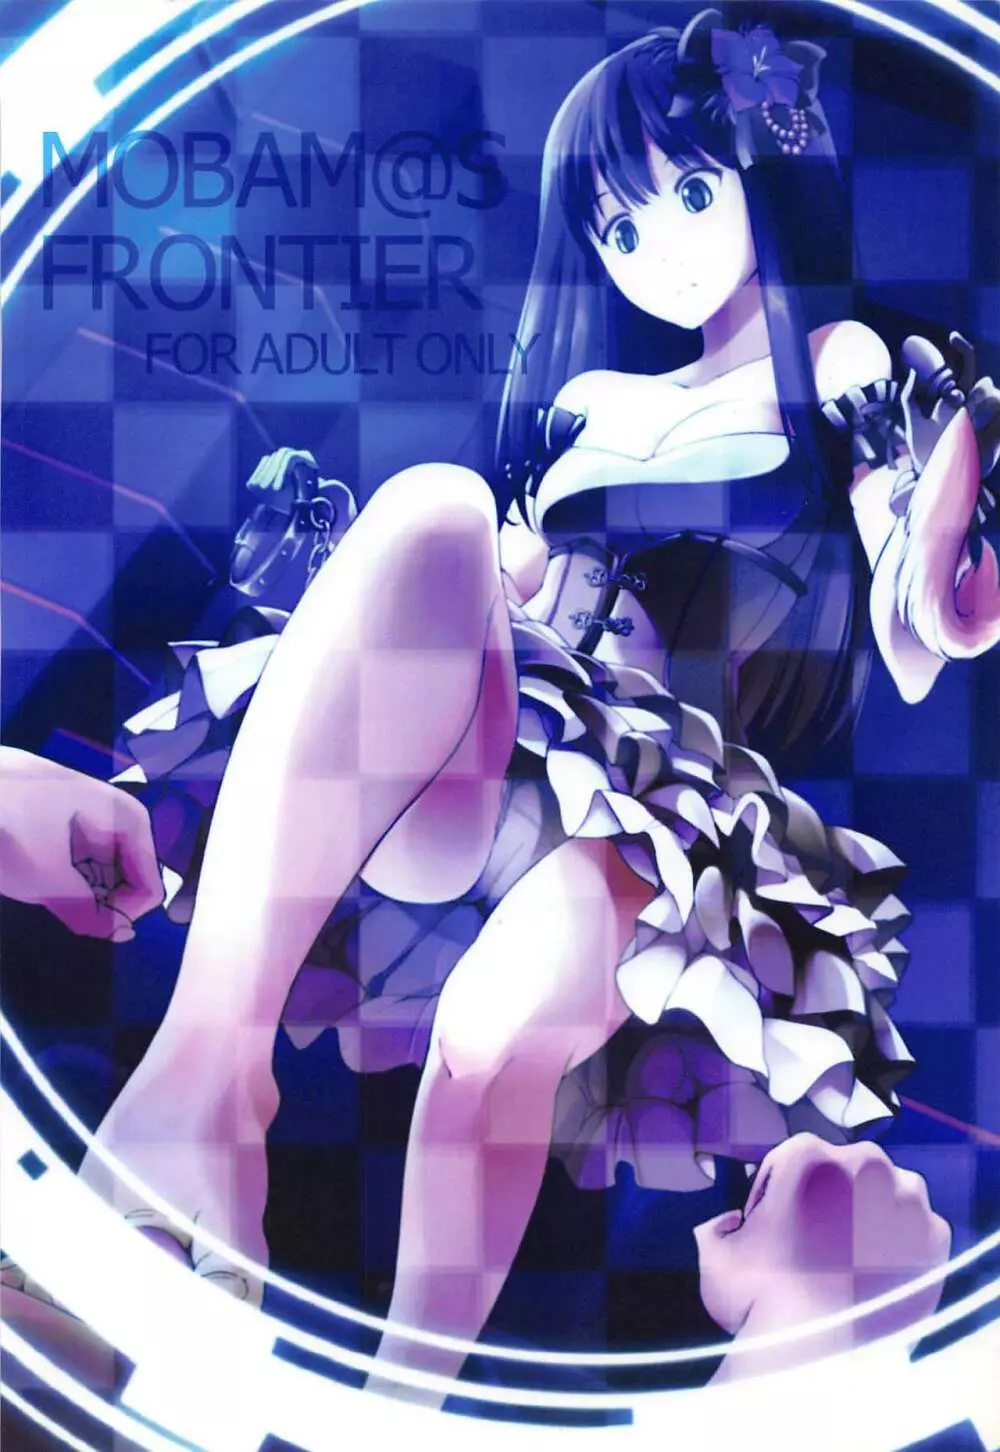 MOBAM@S FRONTIER 26ページ